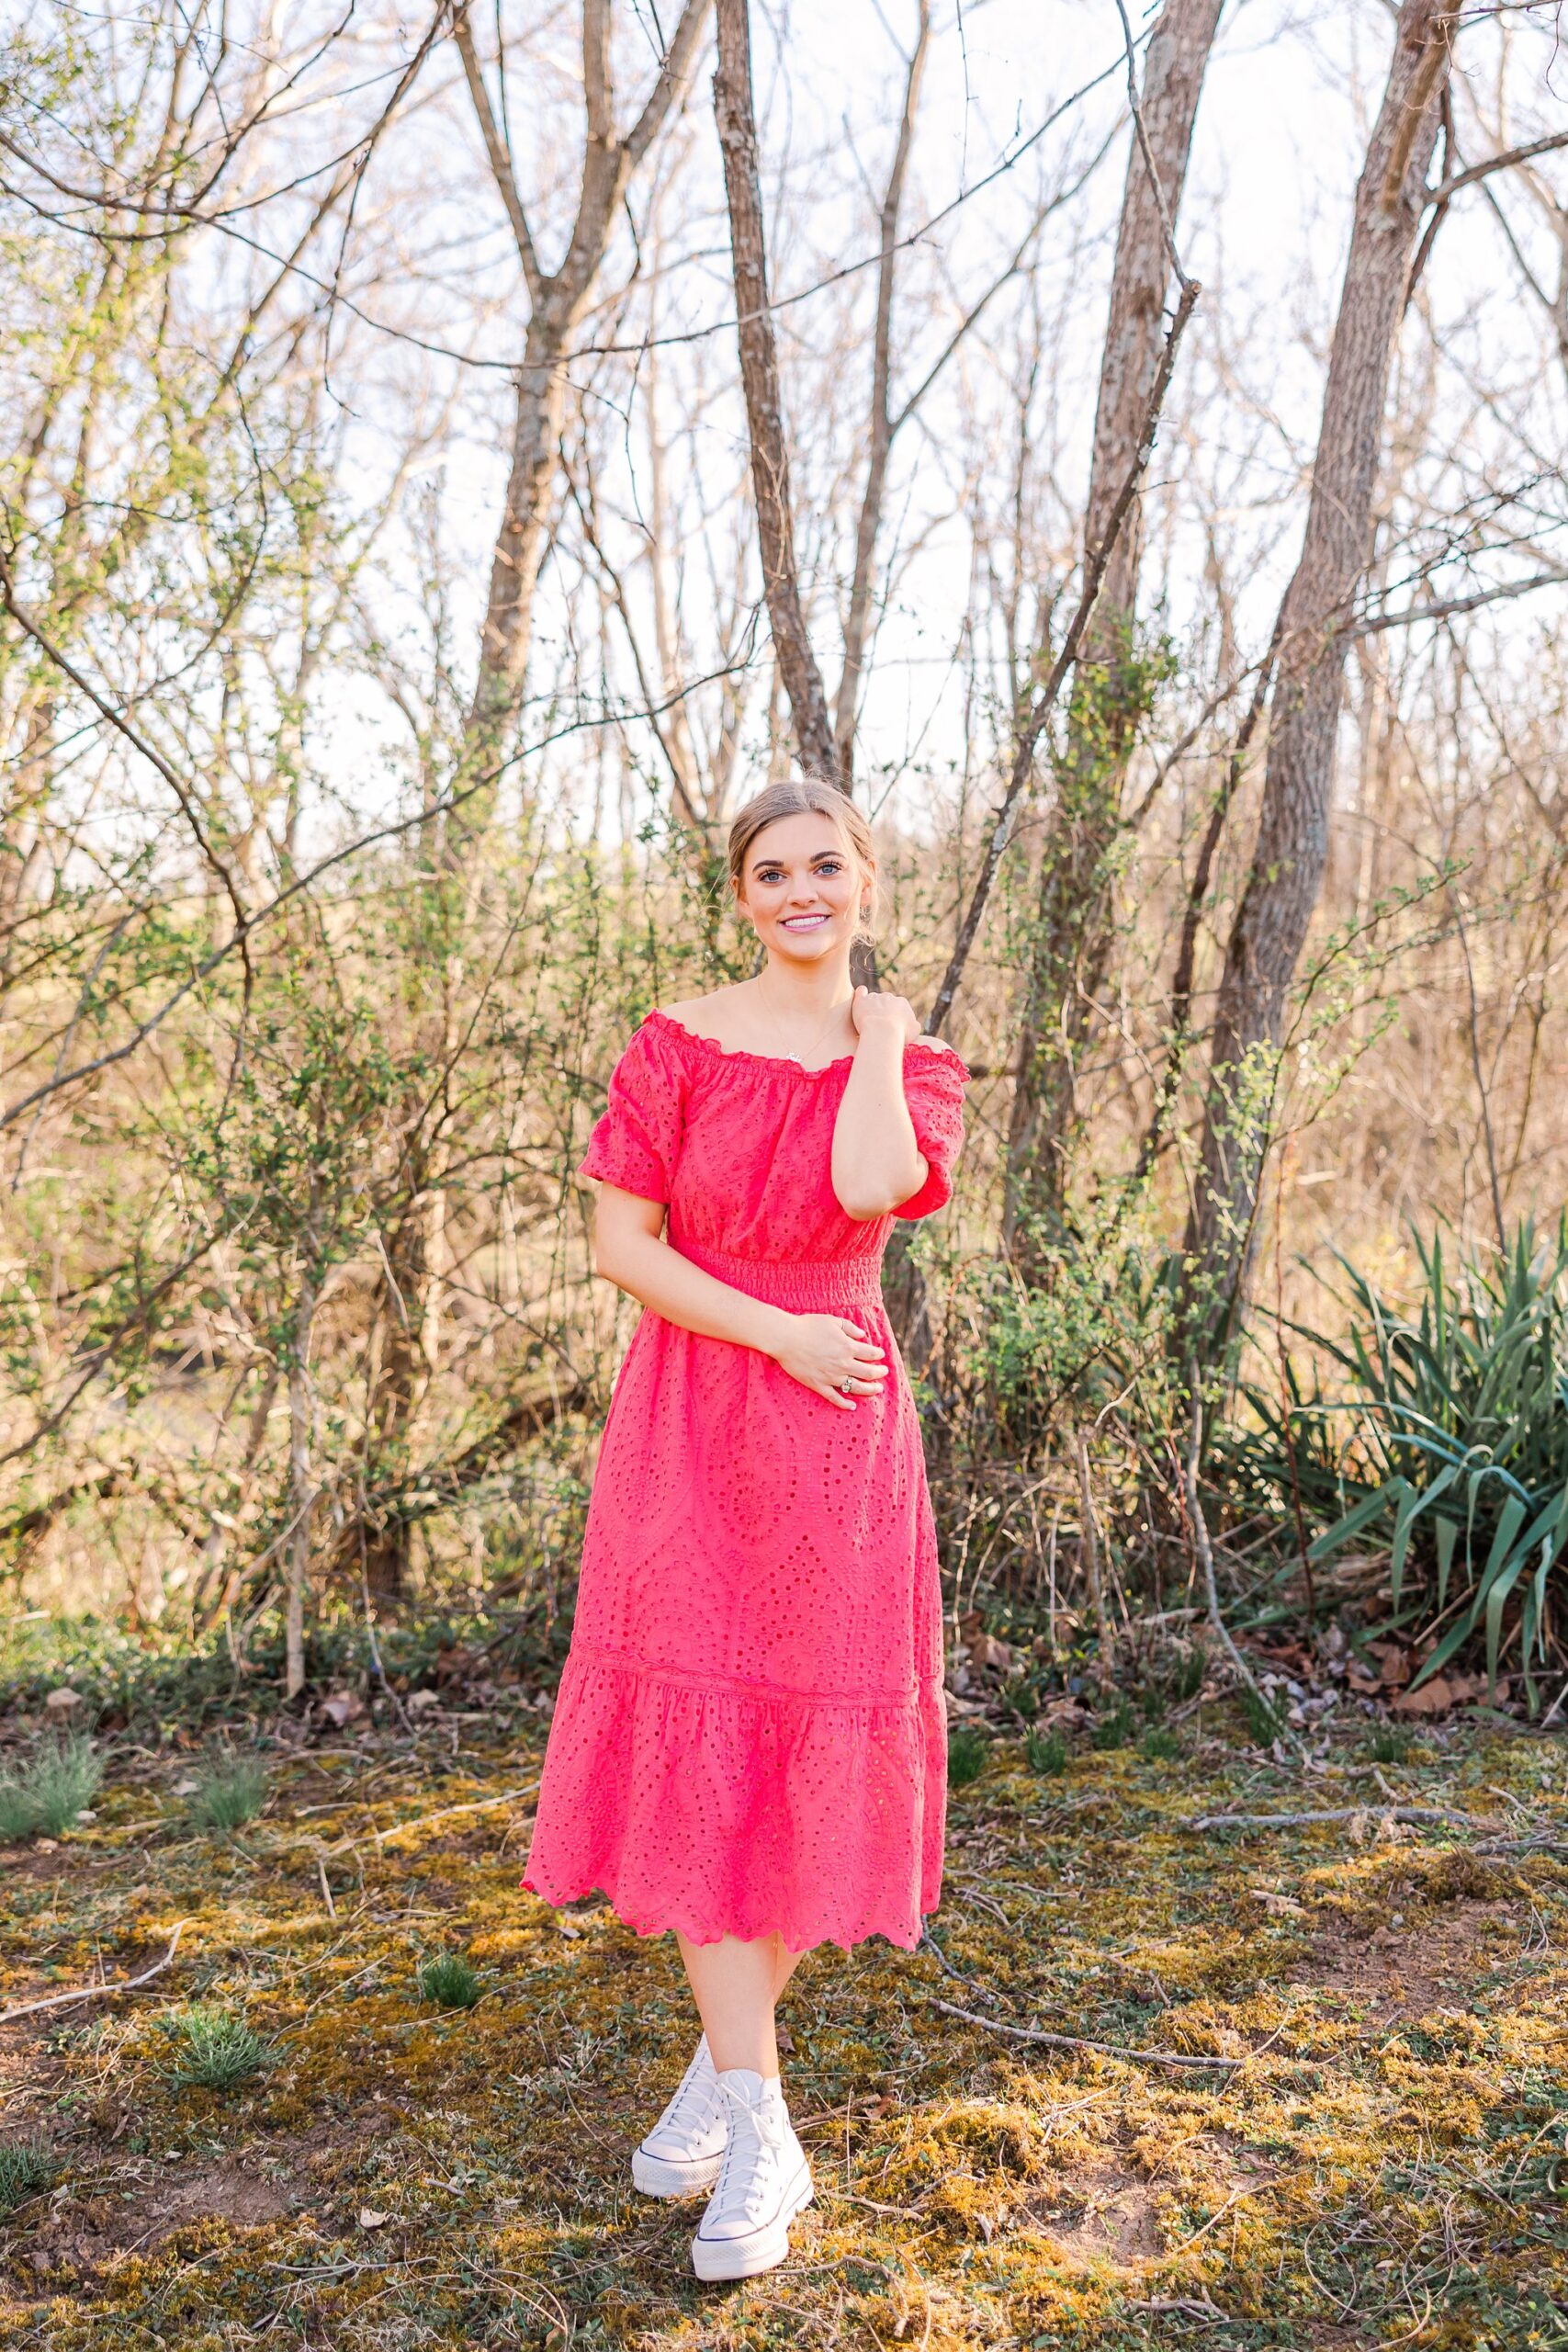 senior girl wearing pink off shoulder dress outside in woods touching her shoulder with one hand